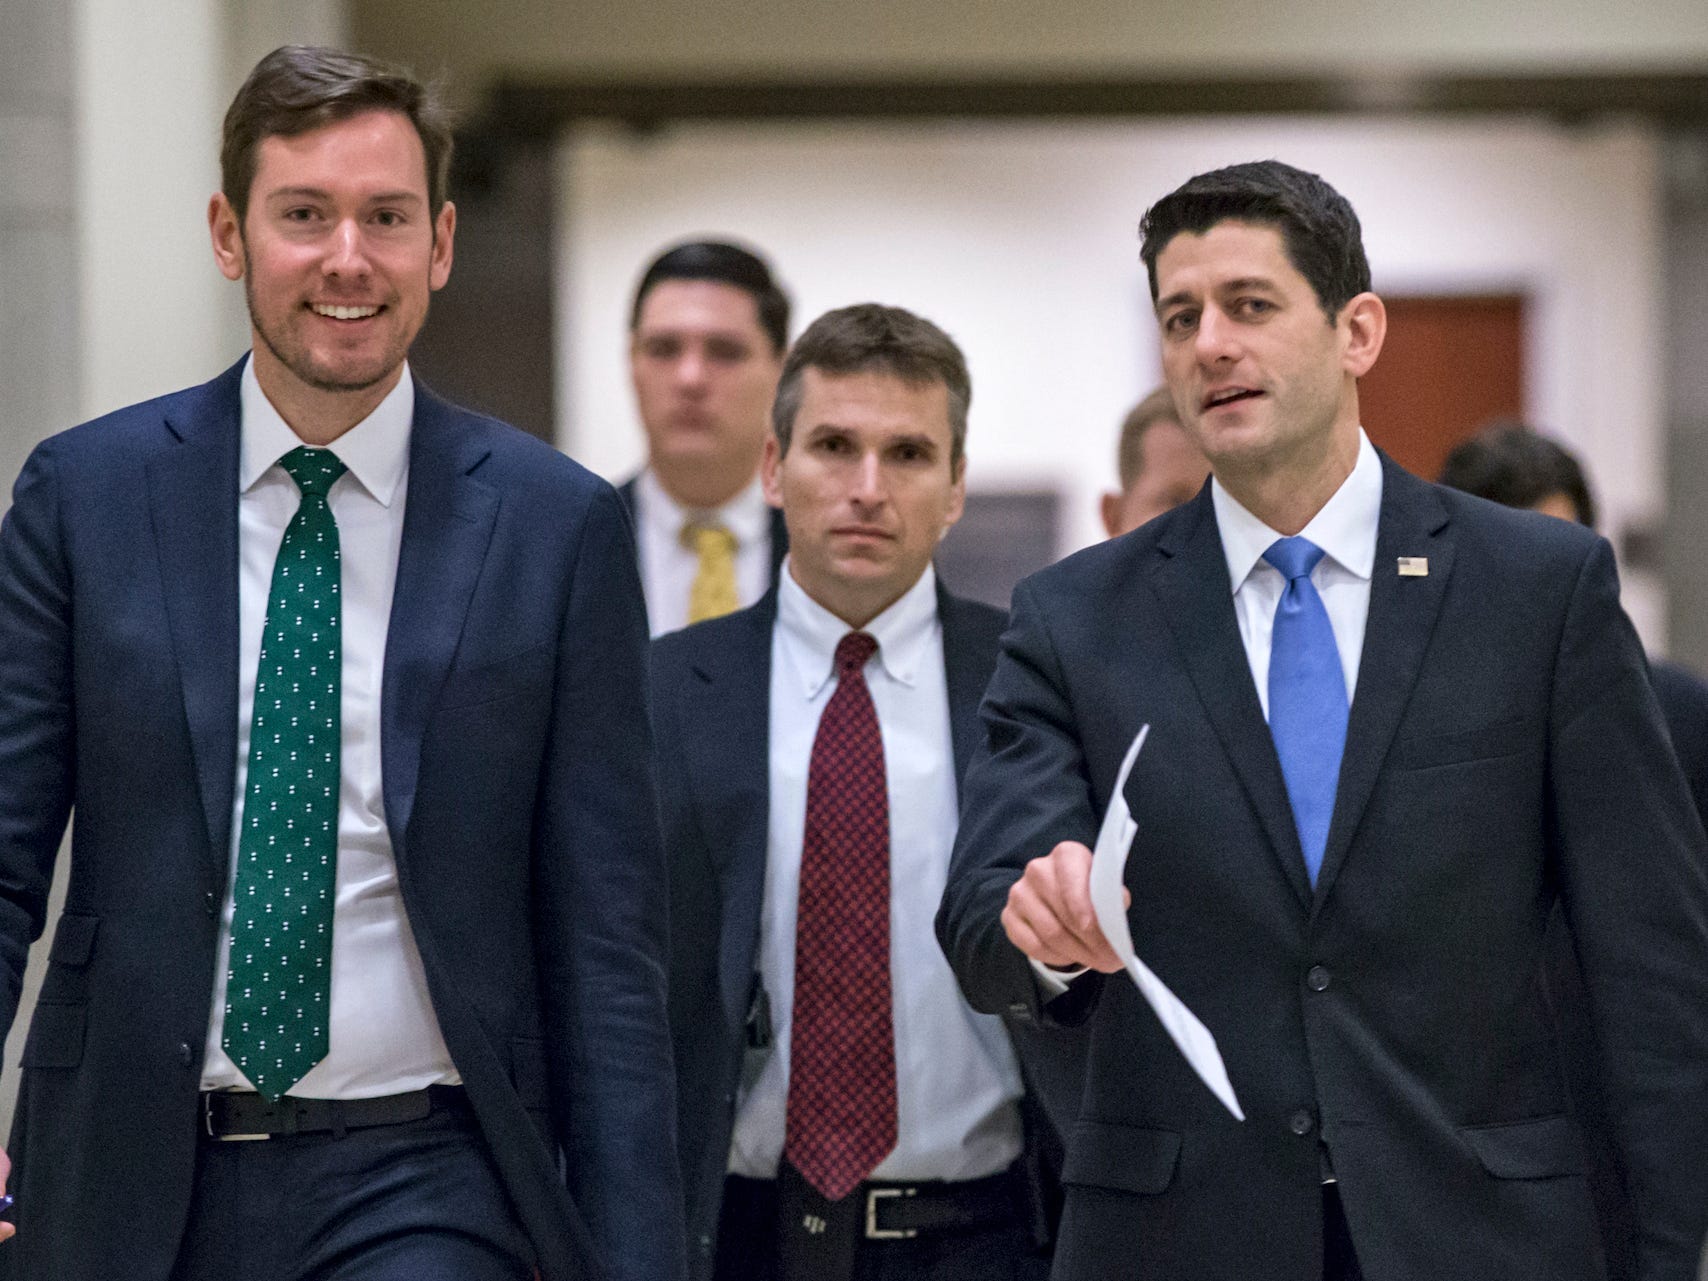 House Speaker Paul Ryan of Wis., center, walks with his chief communications adviser Brendan Buck, left, on the way to meet with reporters on Capitol Hill in Washington, Thursday, Feb. 4, 2016.